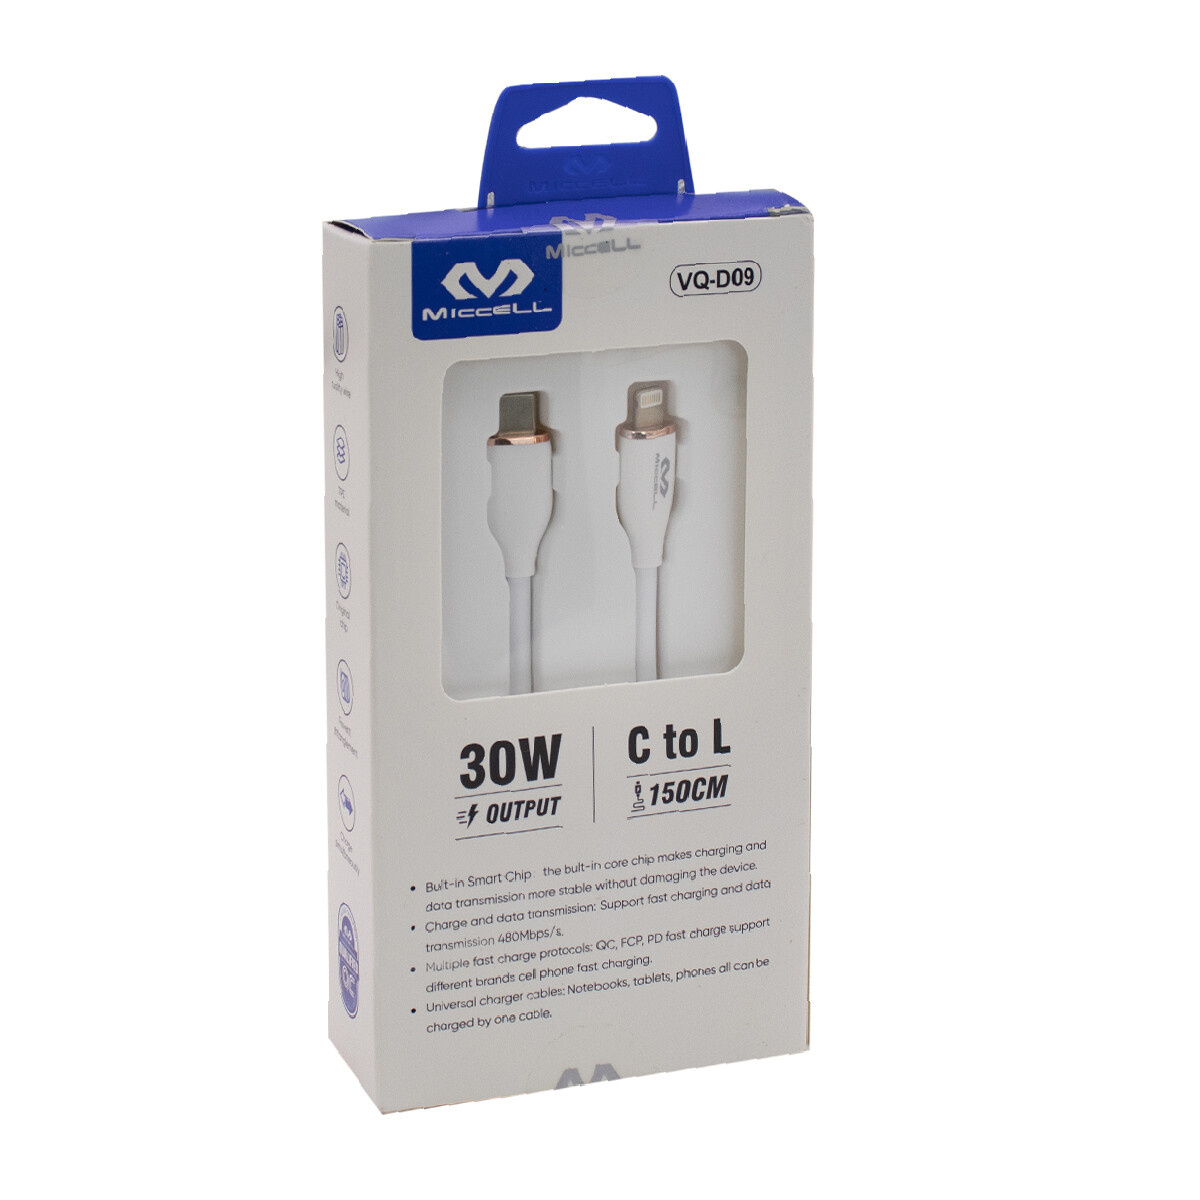 Cable C A iPhone Miccell Vq-d09 30w 1.5m Blanco 